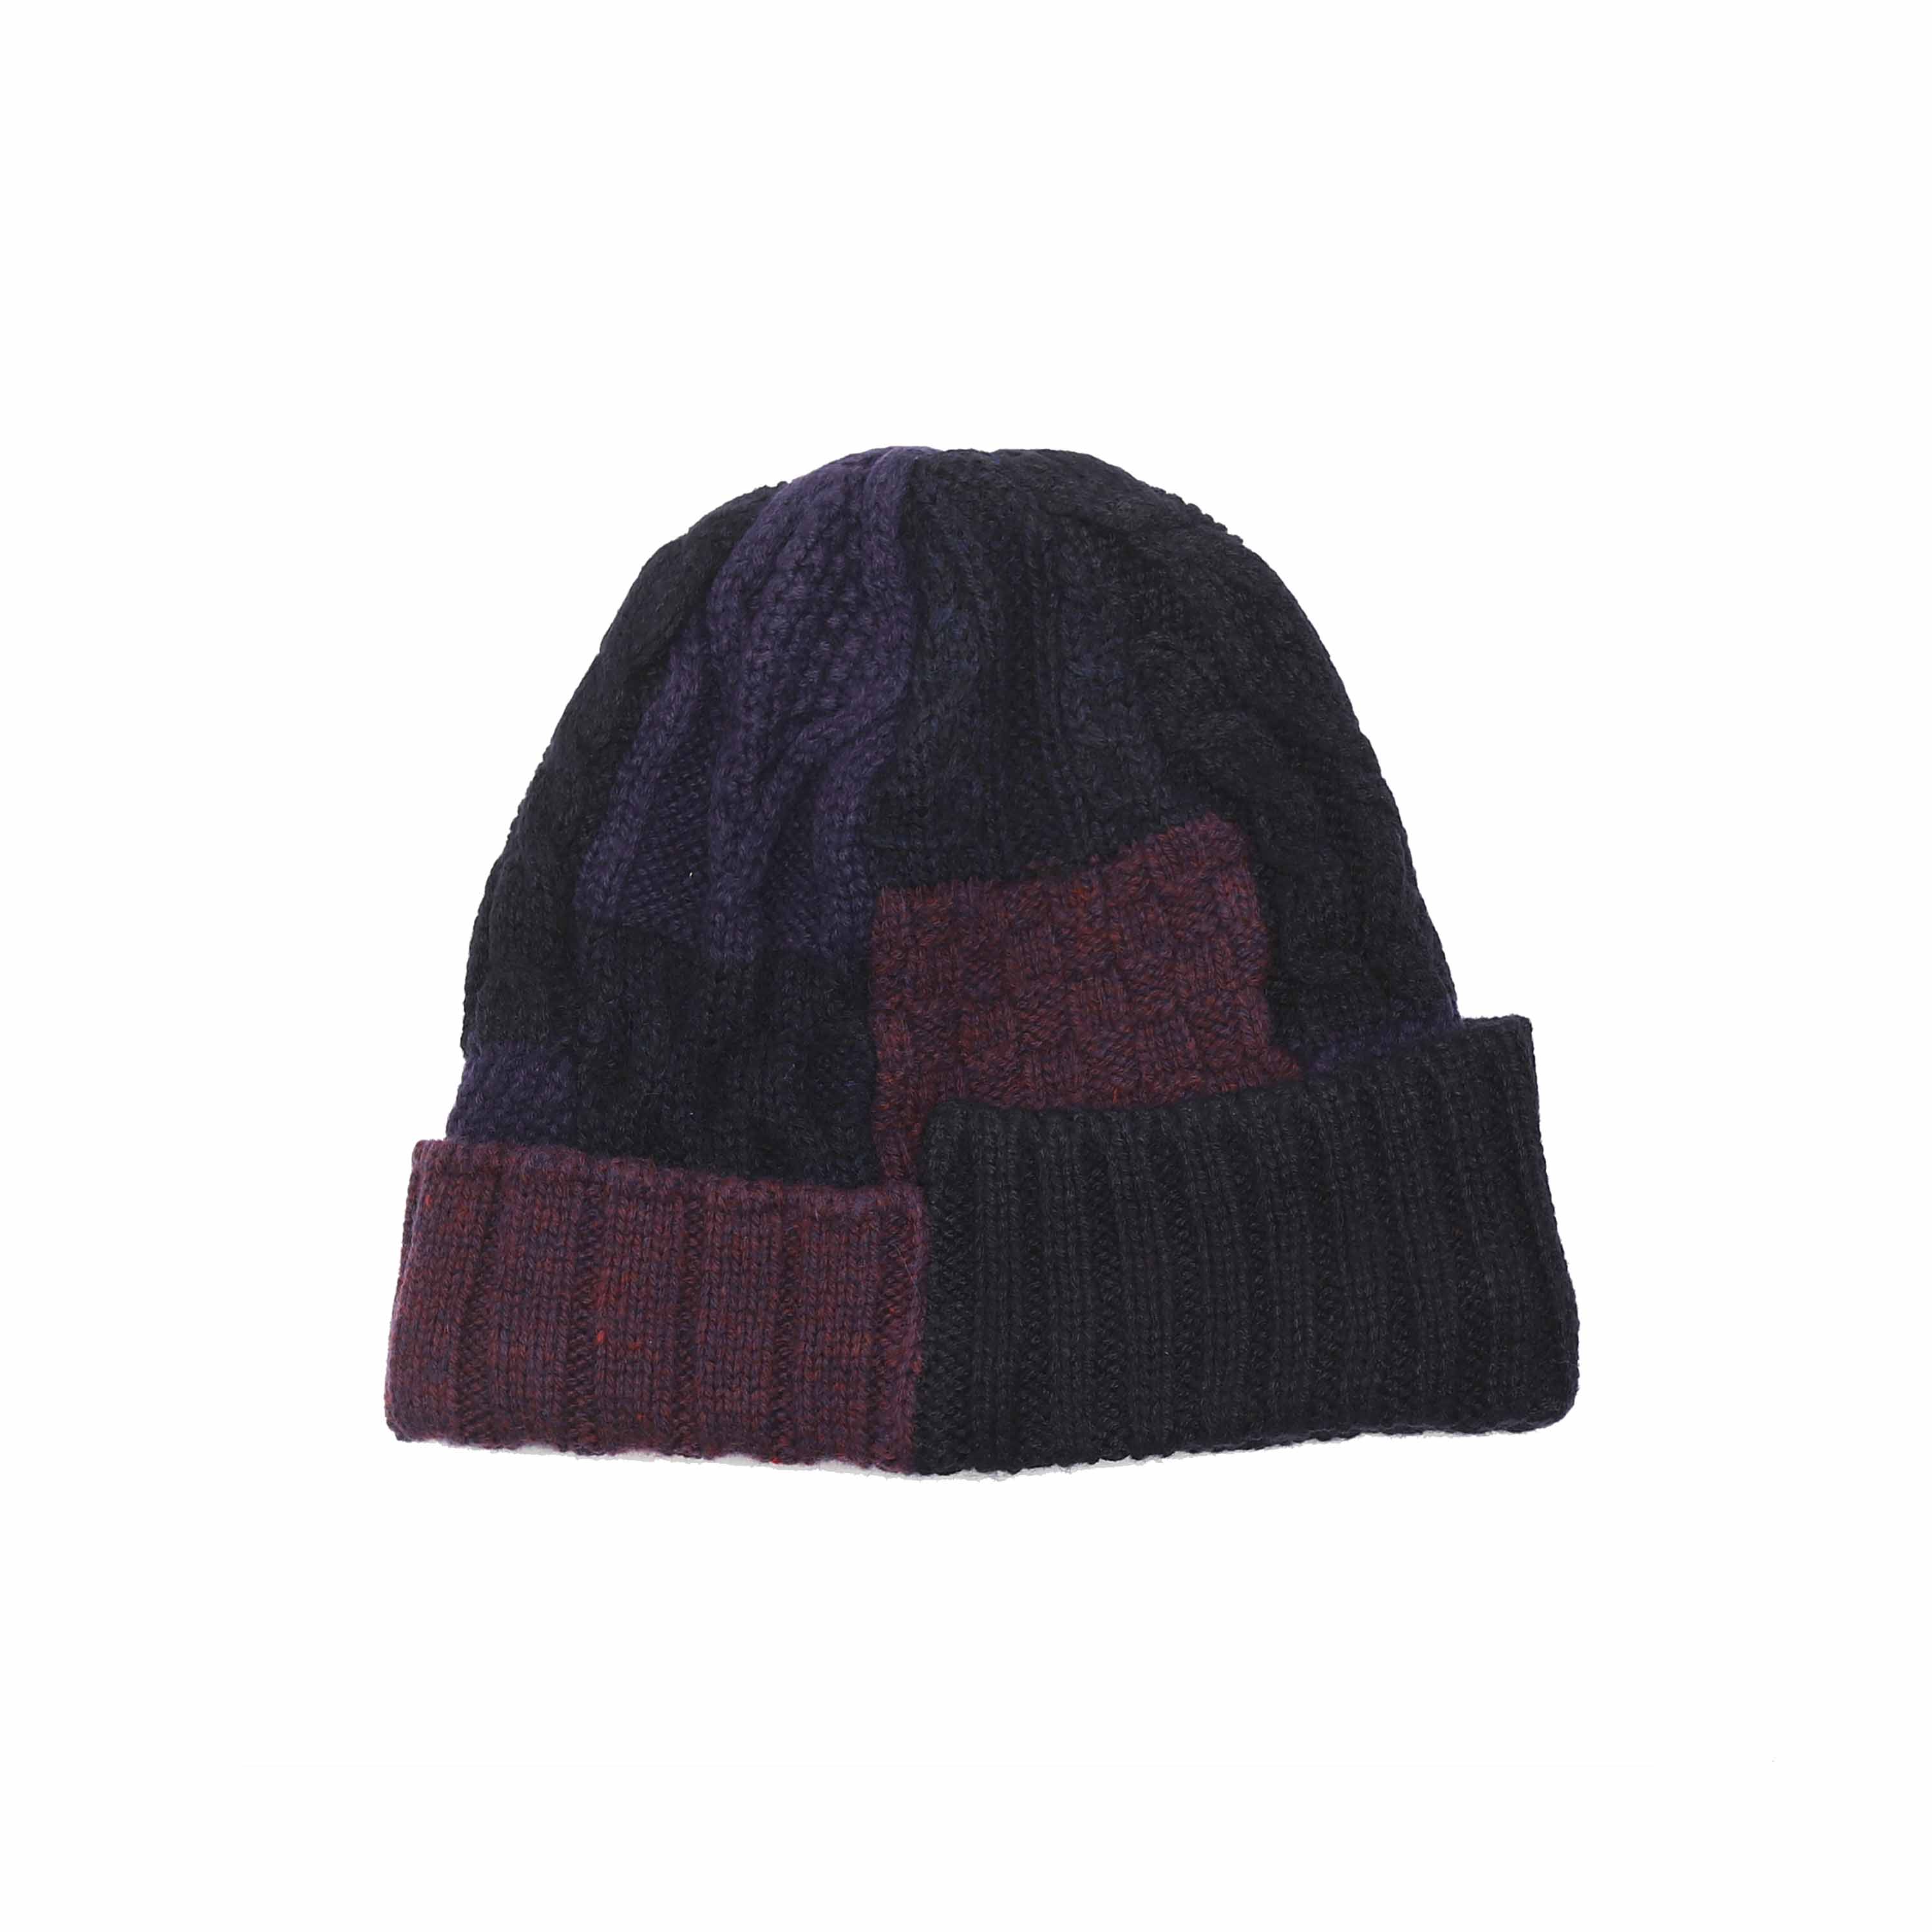 CABLE KNIT CAP - NAVY